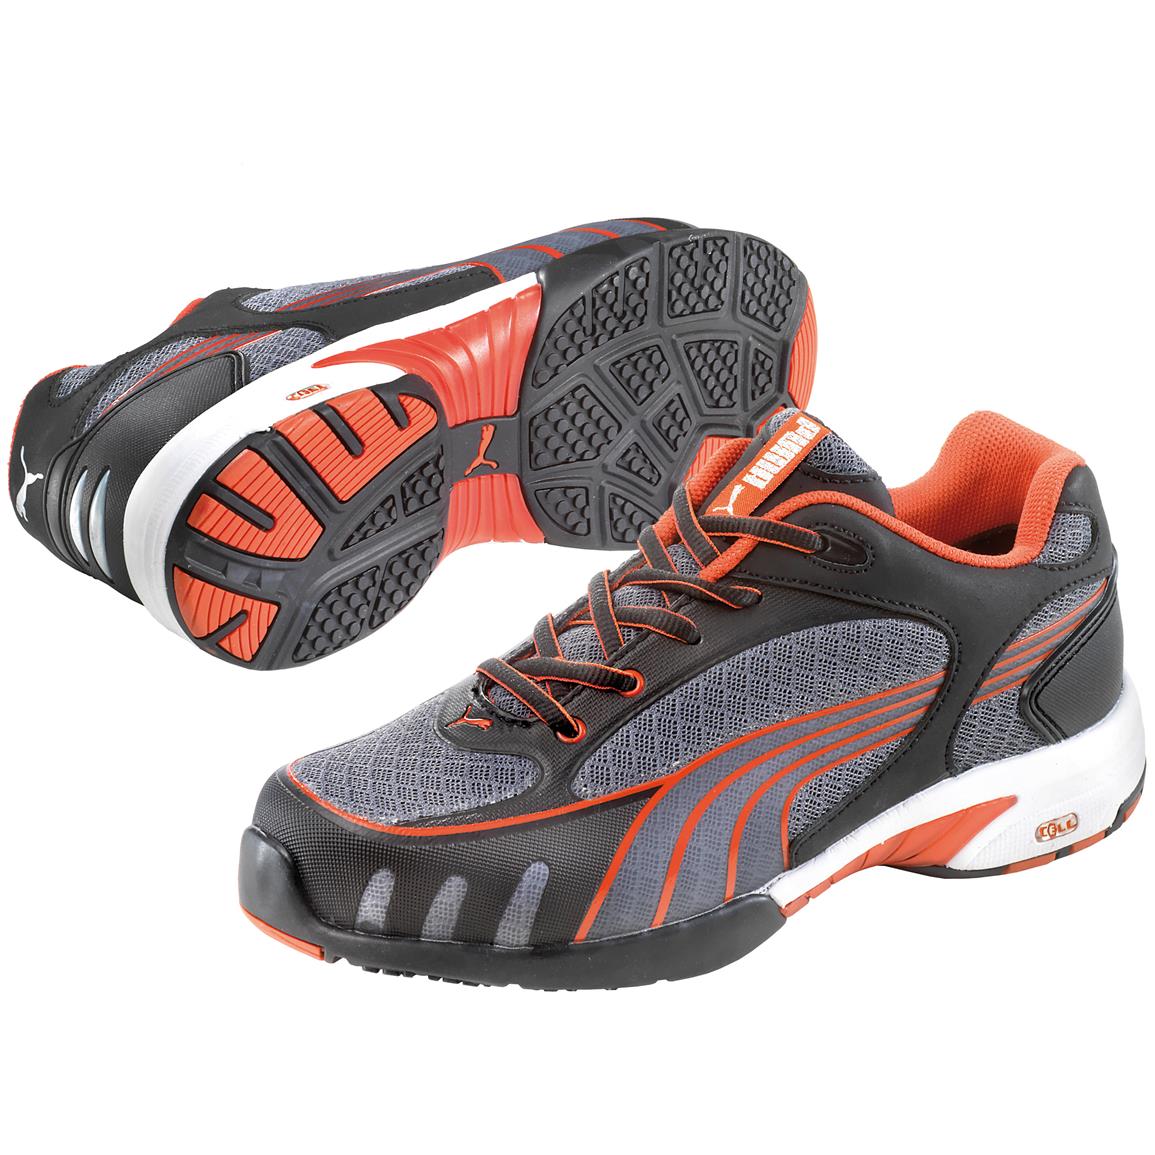 PUMA Safety Fuse Motion Blue Wns Low 642820-36 Protective Footwear S1 ...